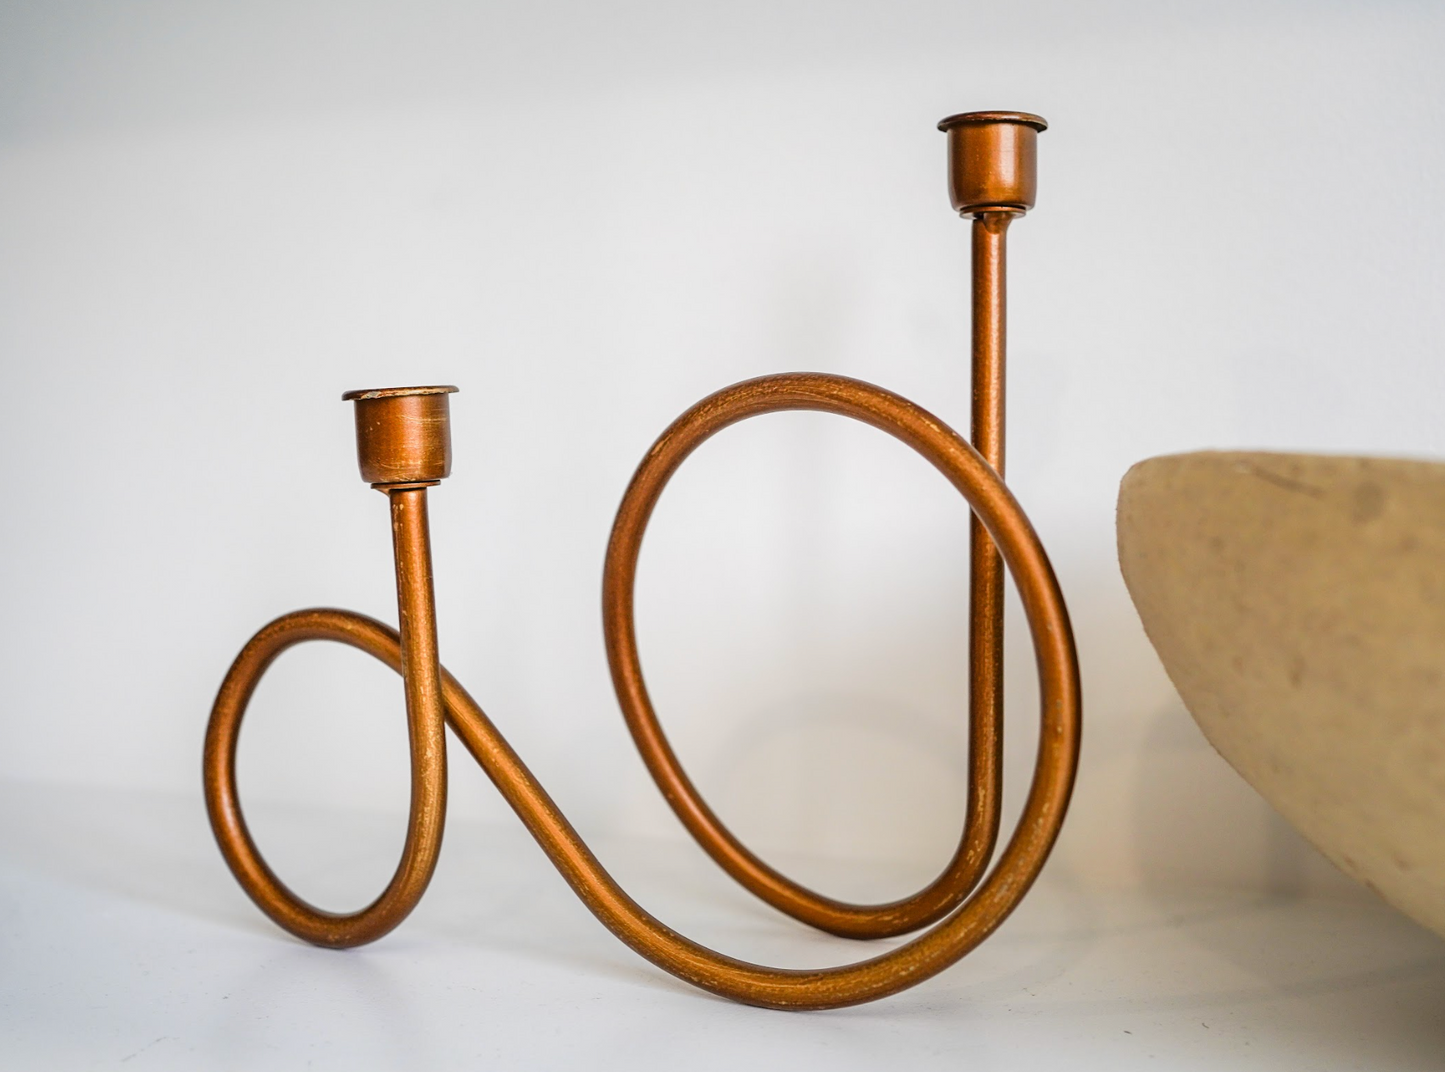 The Cooper Double Candlestick Holder